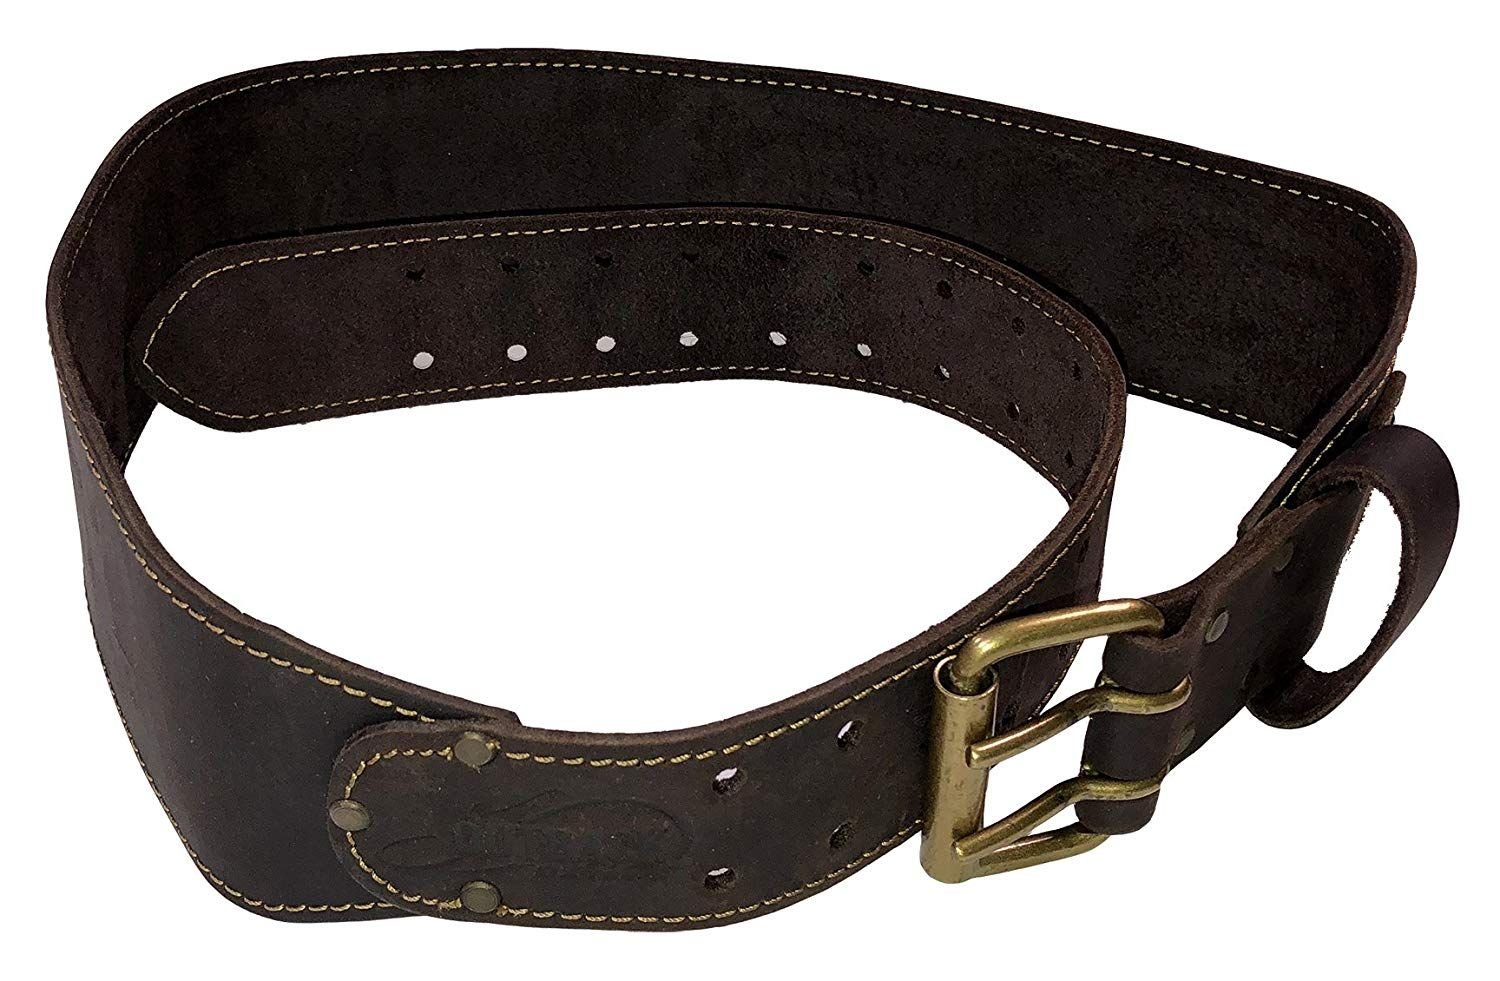 OX-P263301 - OX PRO 3-INCH TOOL BELT | OIL-TANNED LEATHER-SM-MED